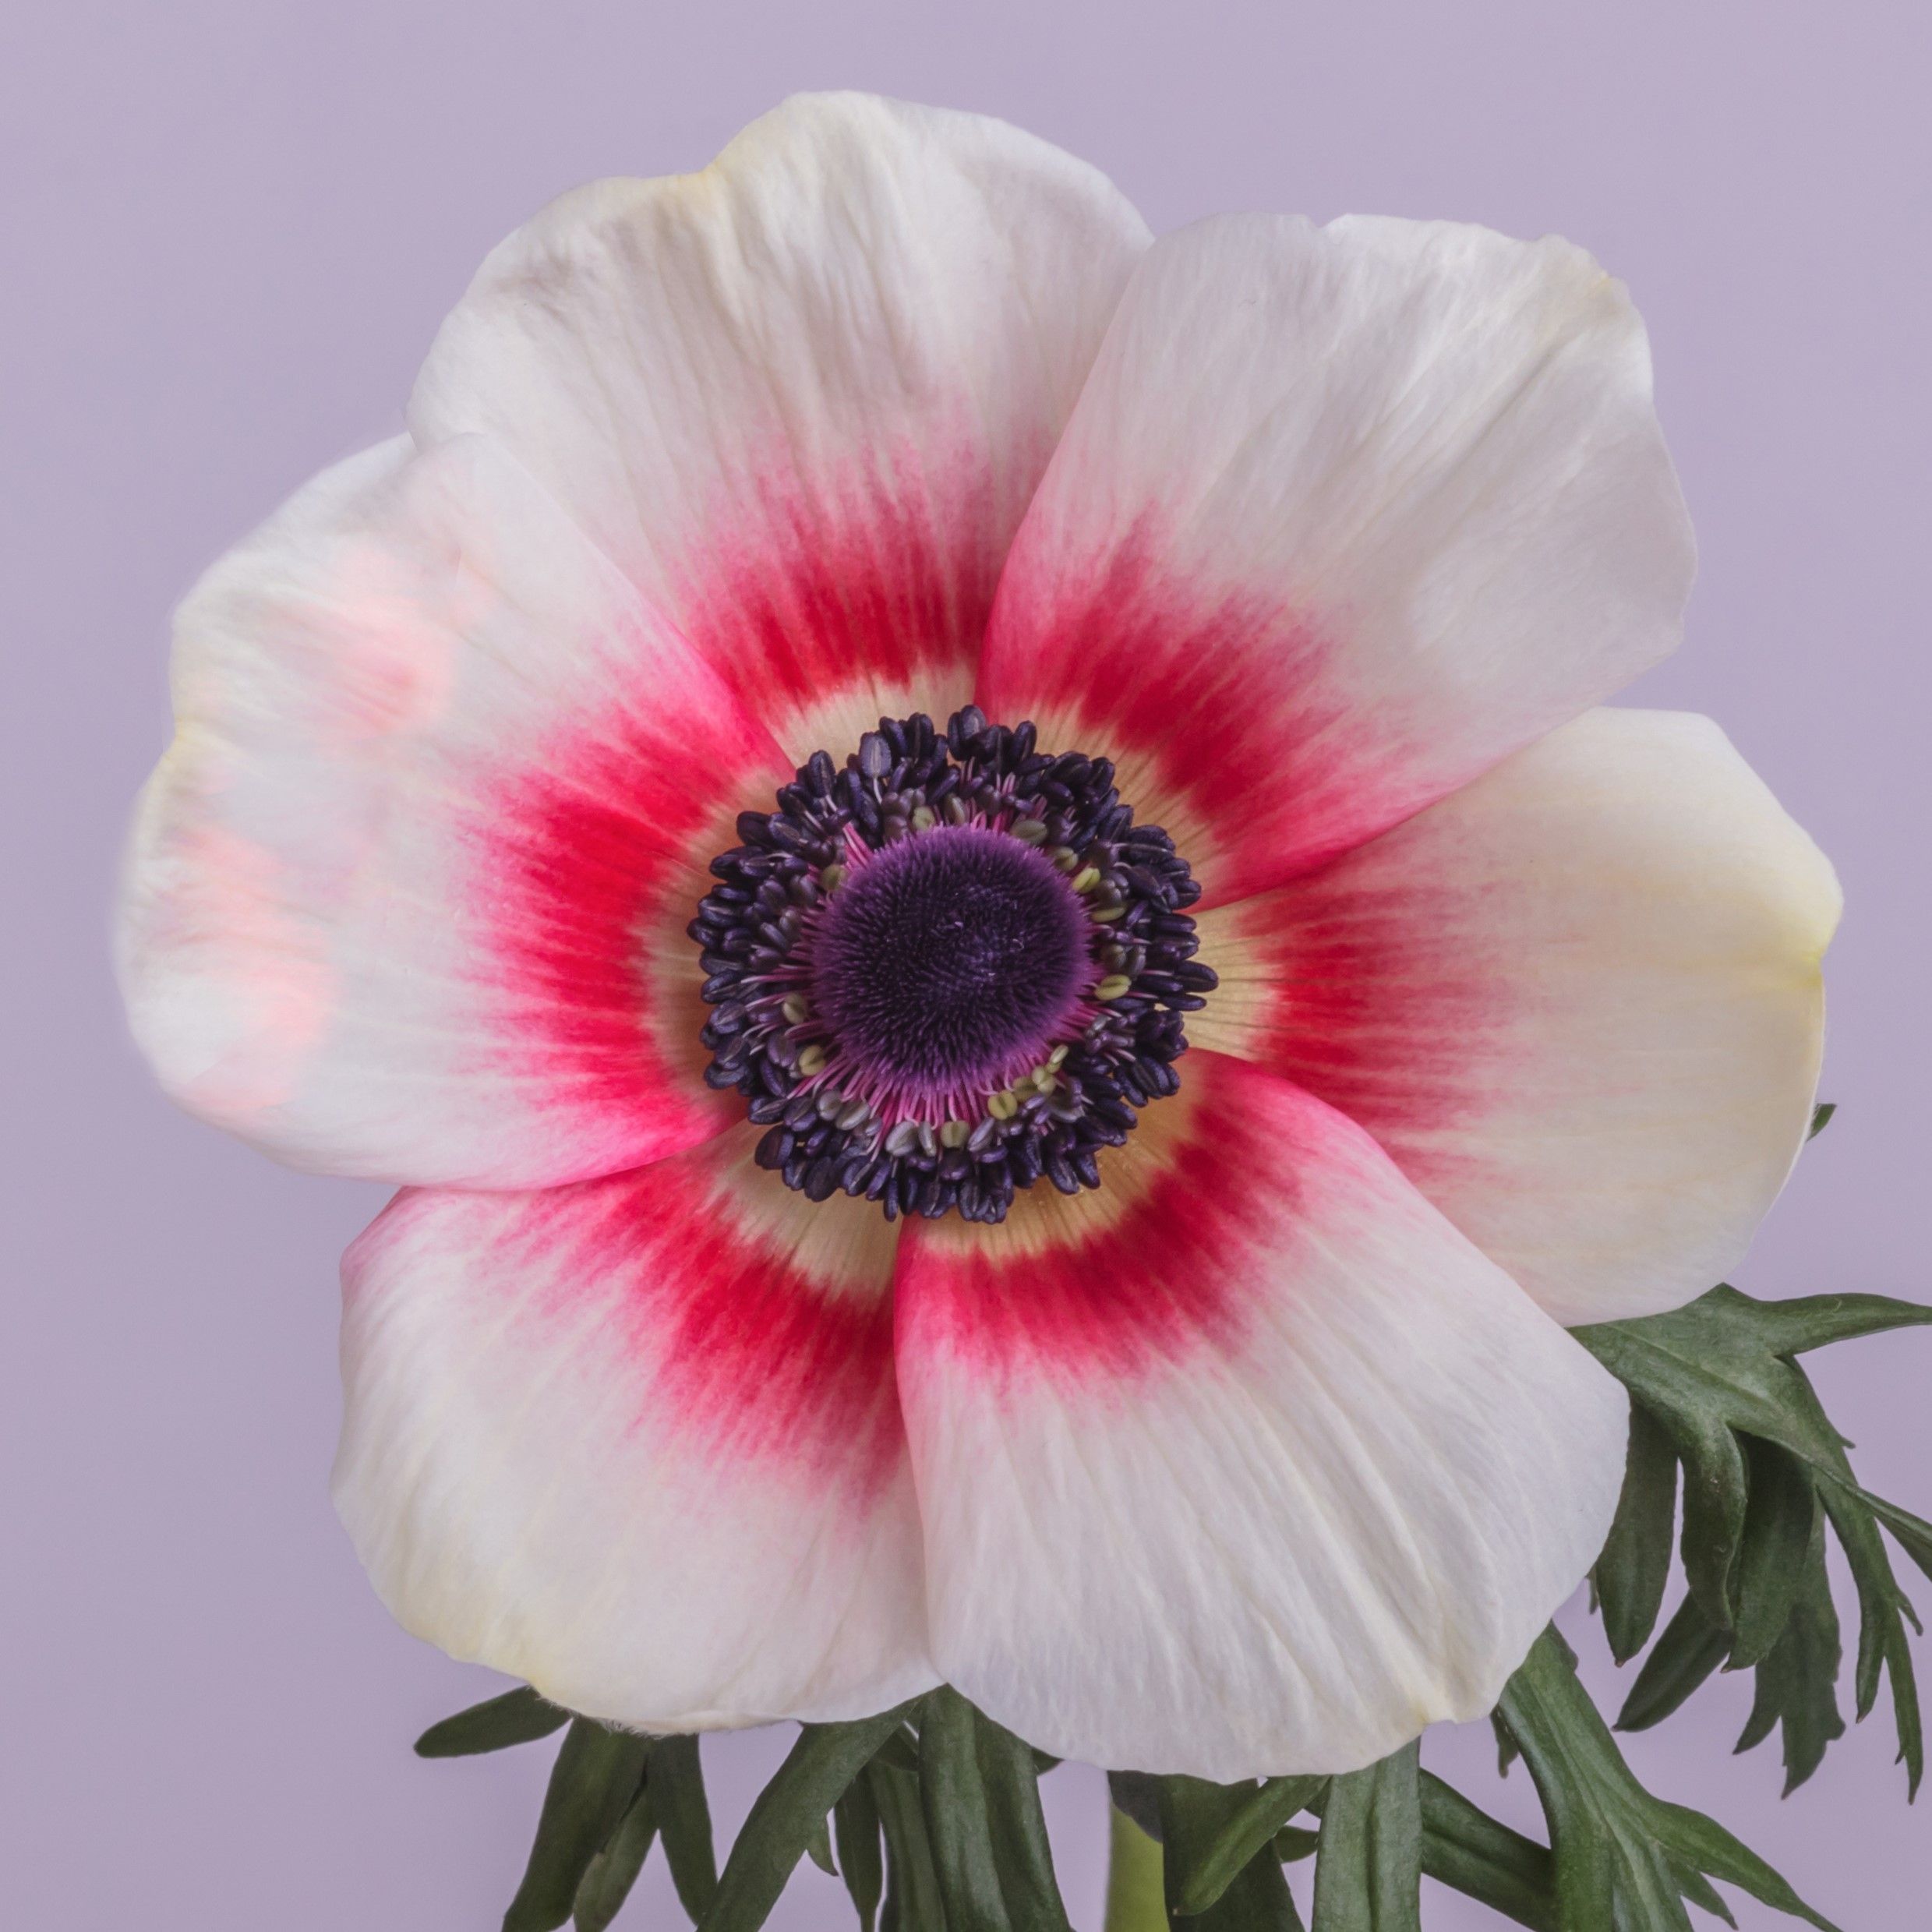 Anemone Bicolor Red